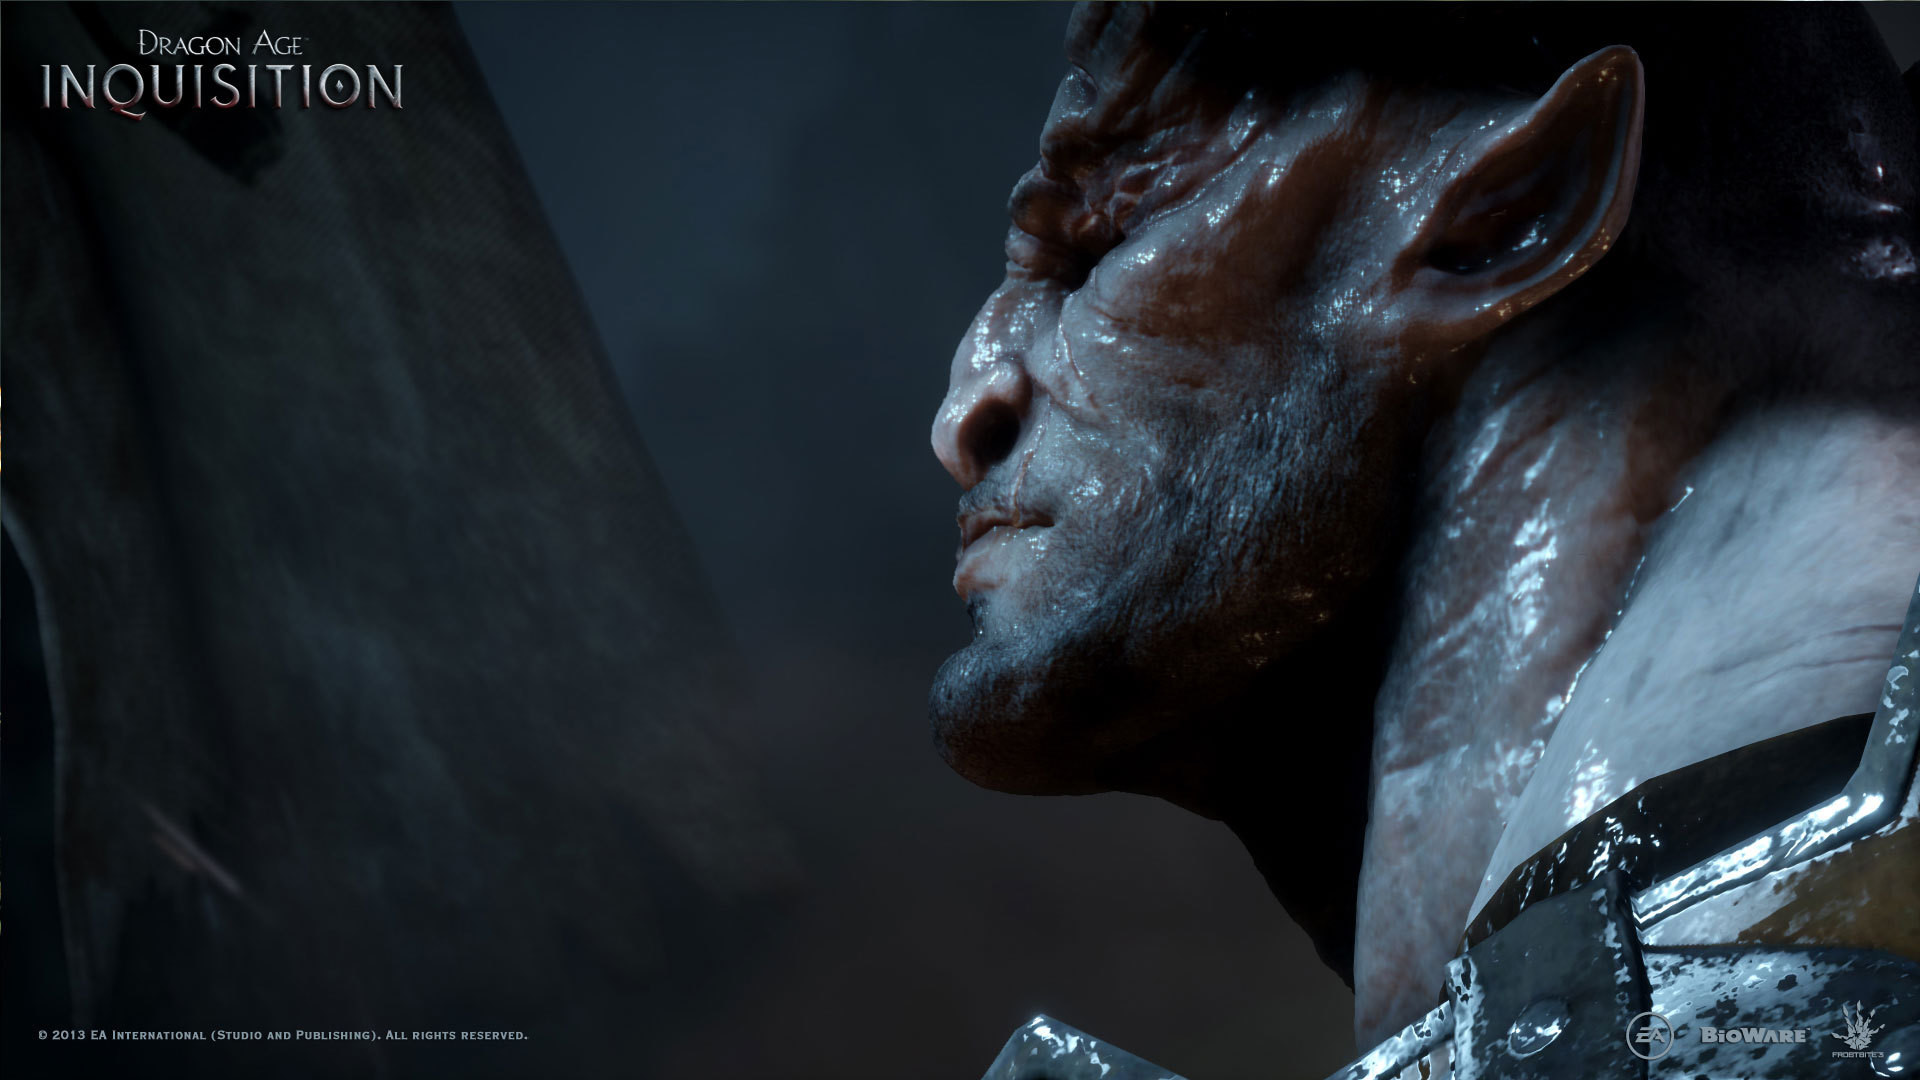 1920x1080 Dragon Age Inquisition: the demon wallpapers and images - wallpapers .